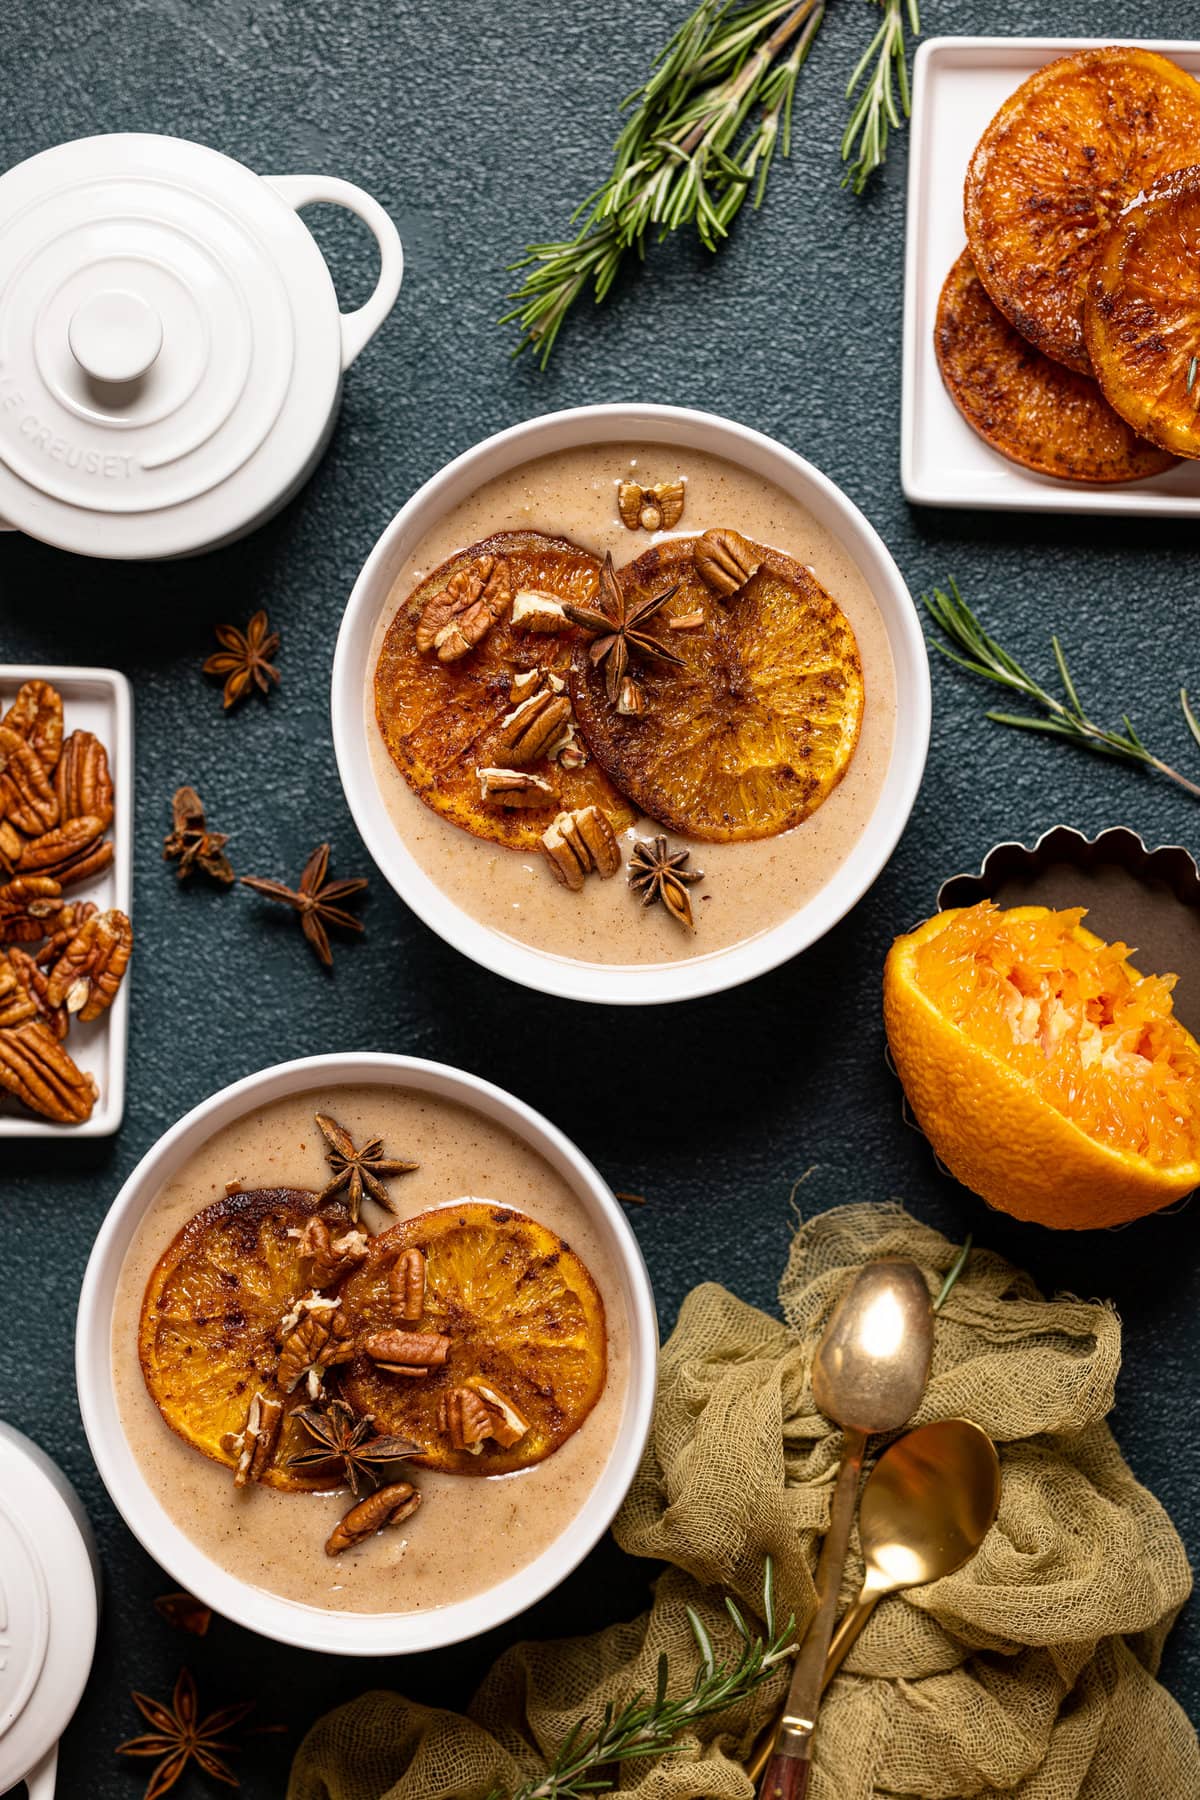 Two bowls of Maple Cinnamon Oatmeal with Roasted Oranges